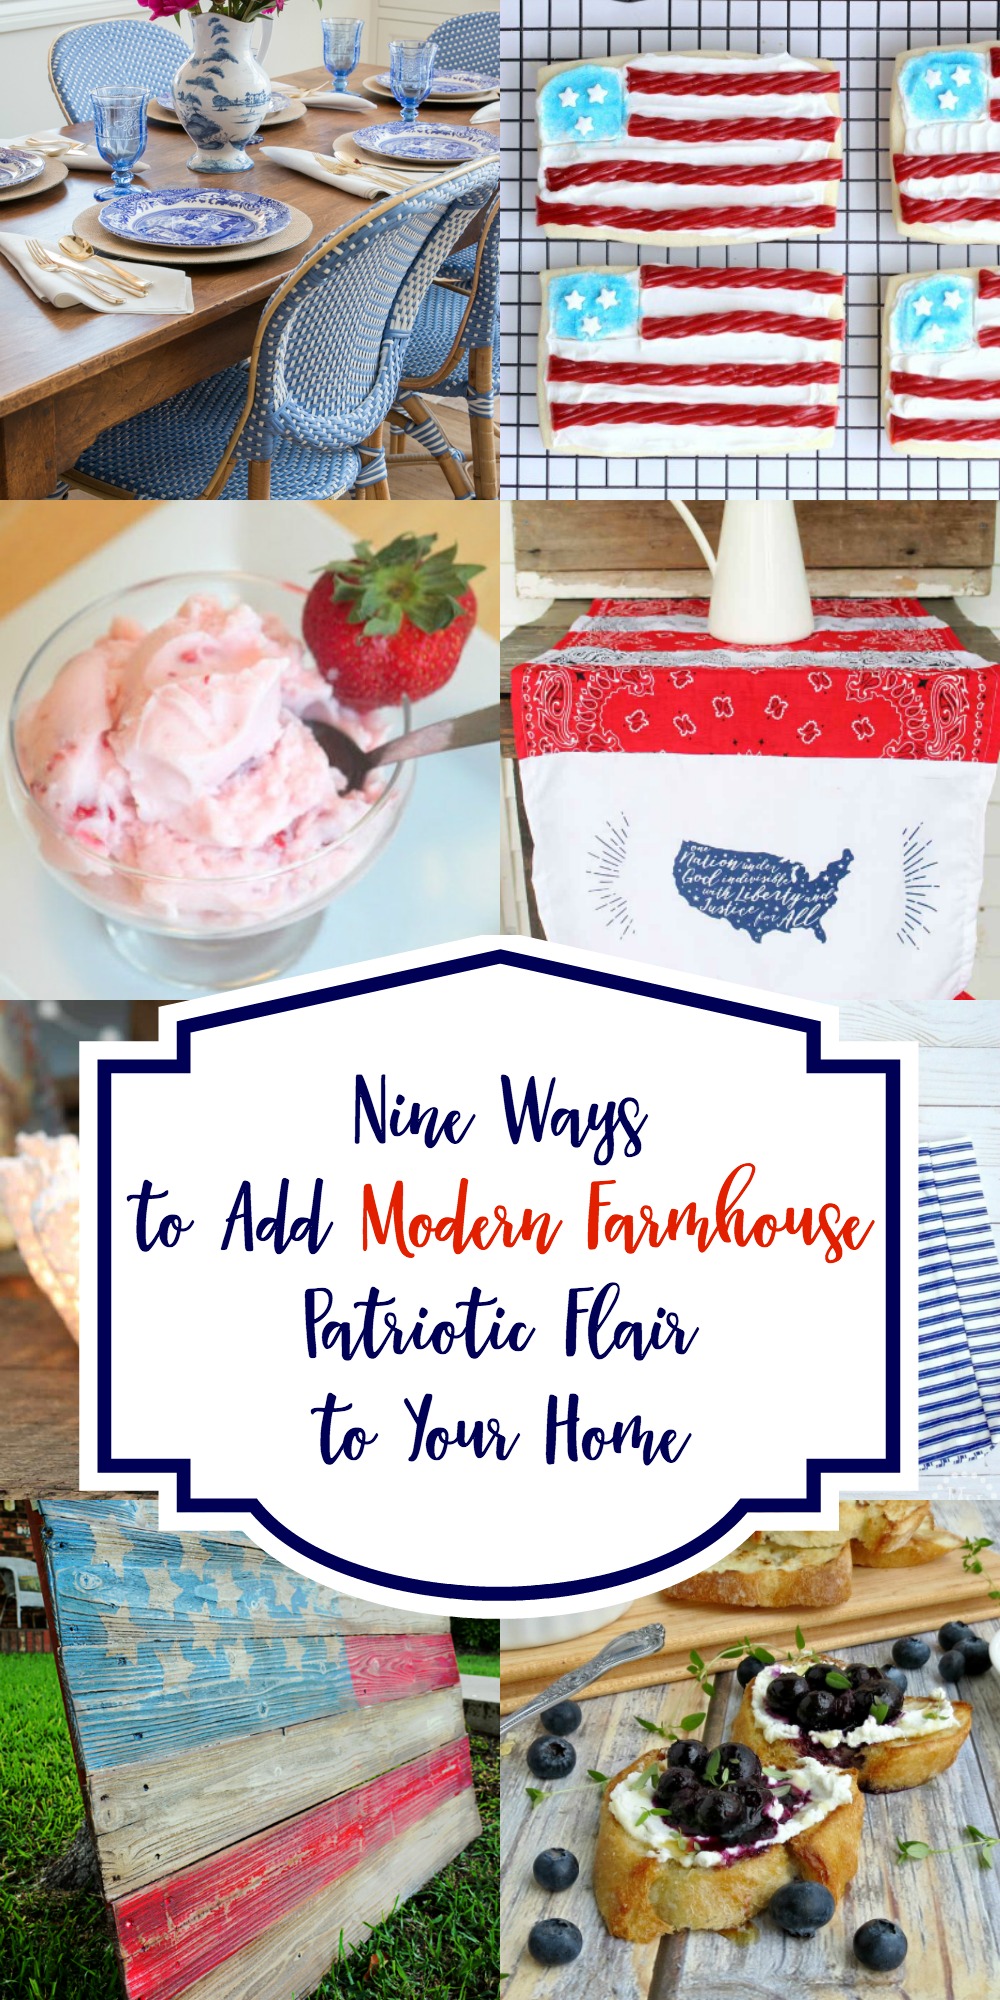 9 Ways to Add Modern Farmhouse Patriotic Flair to Your Home